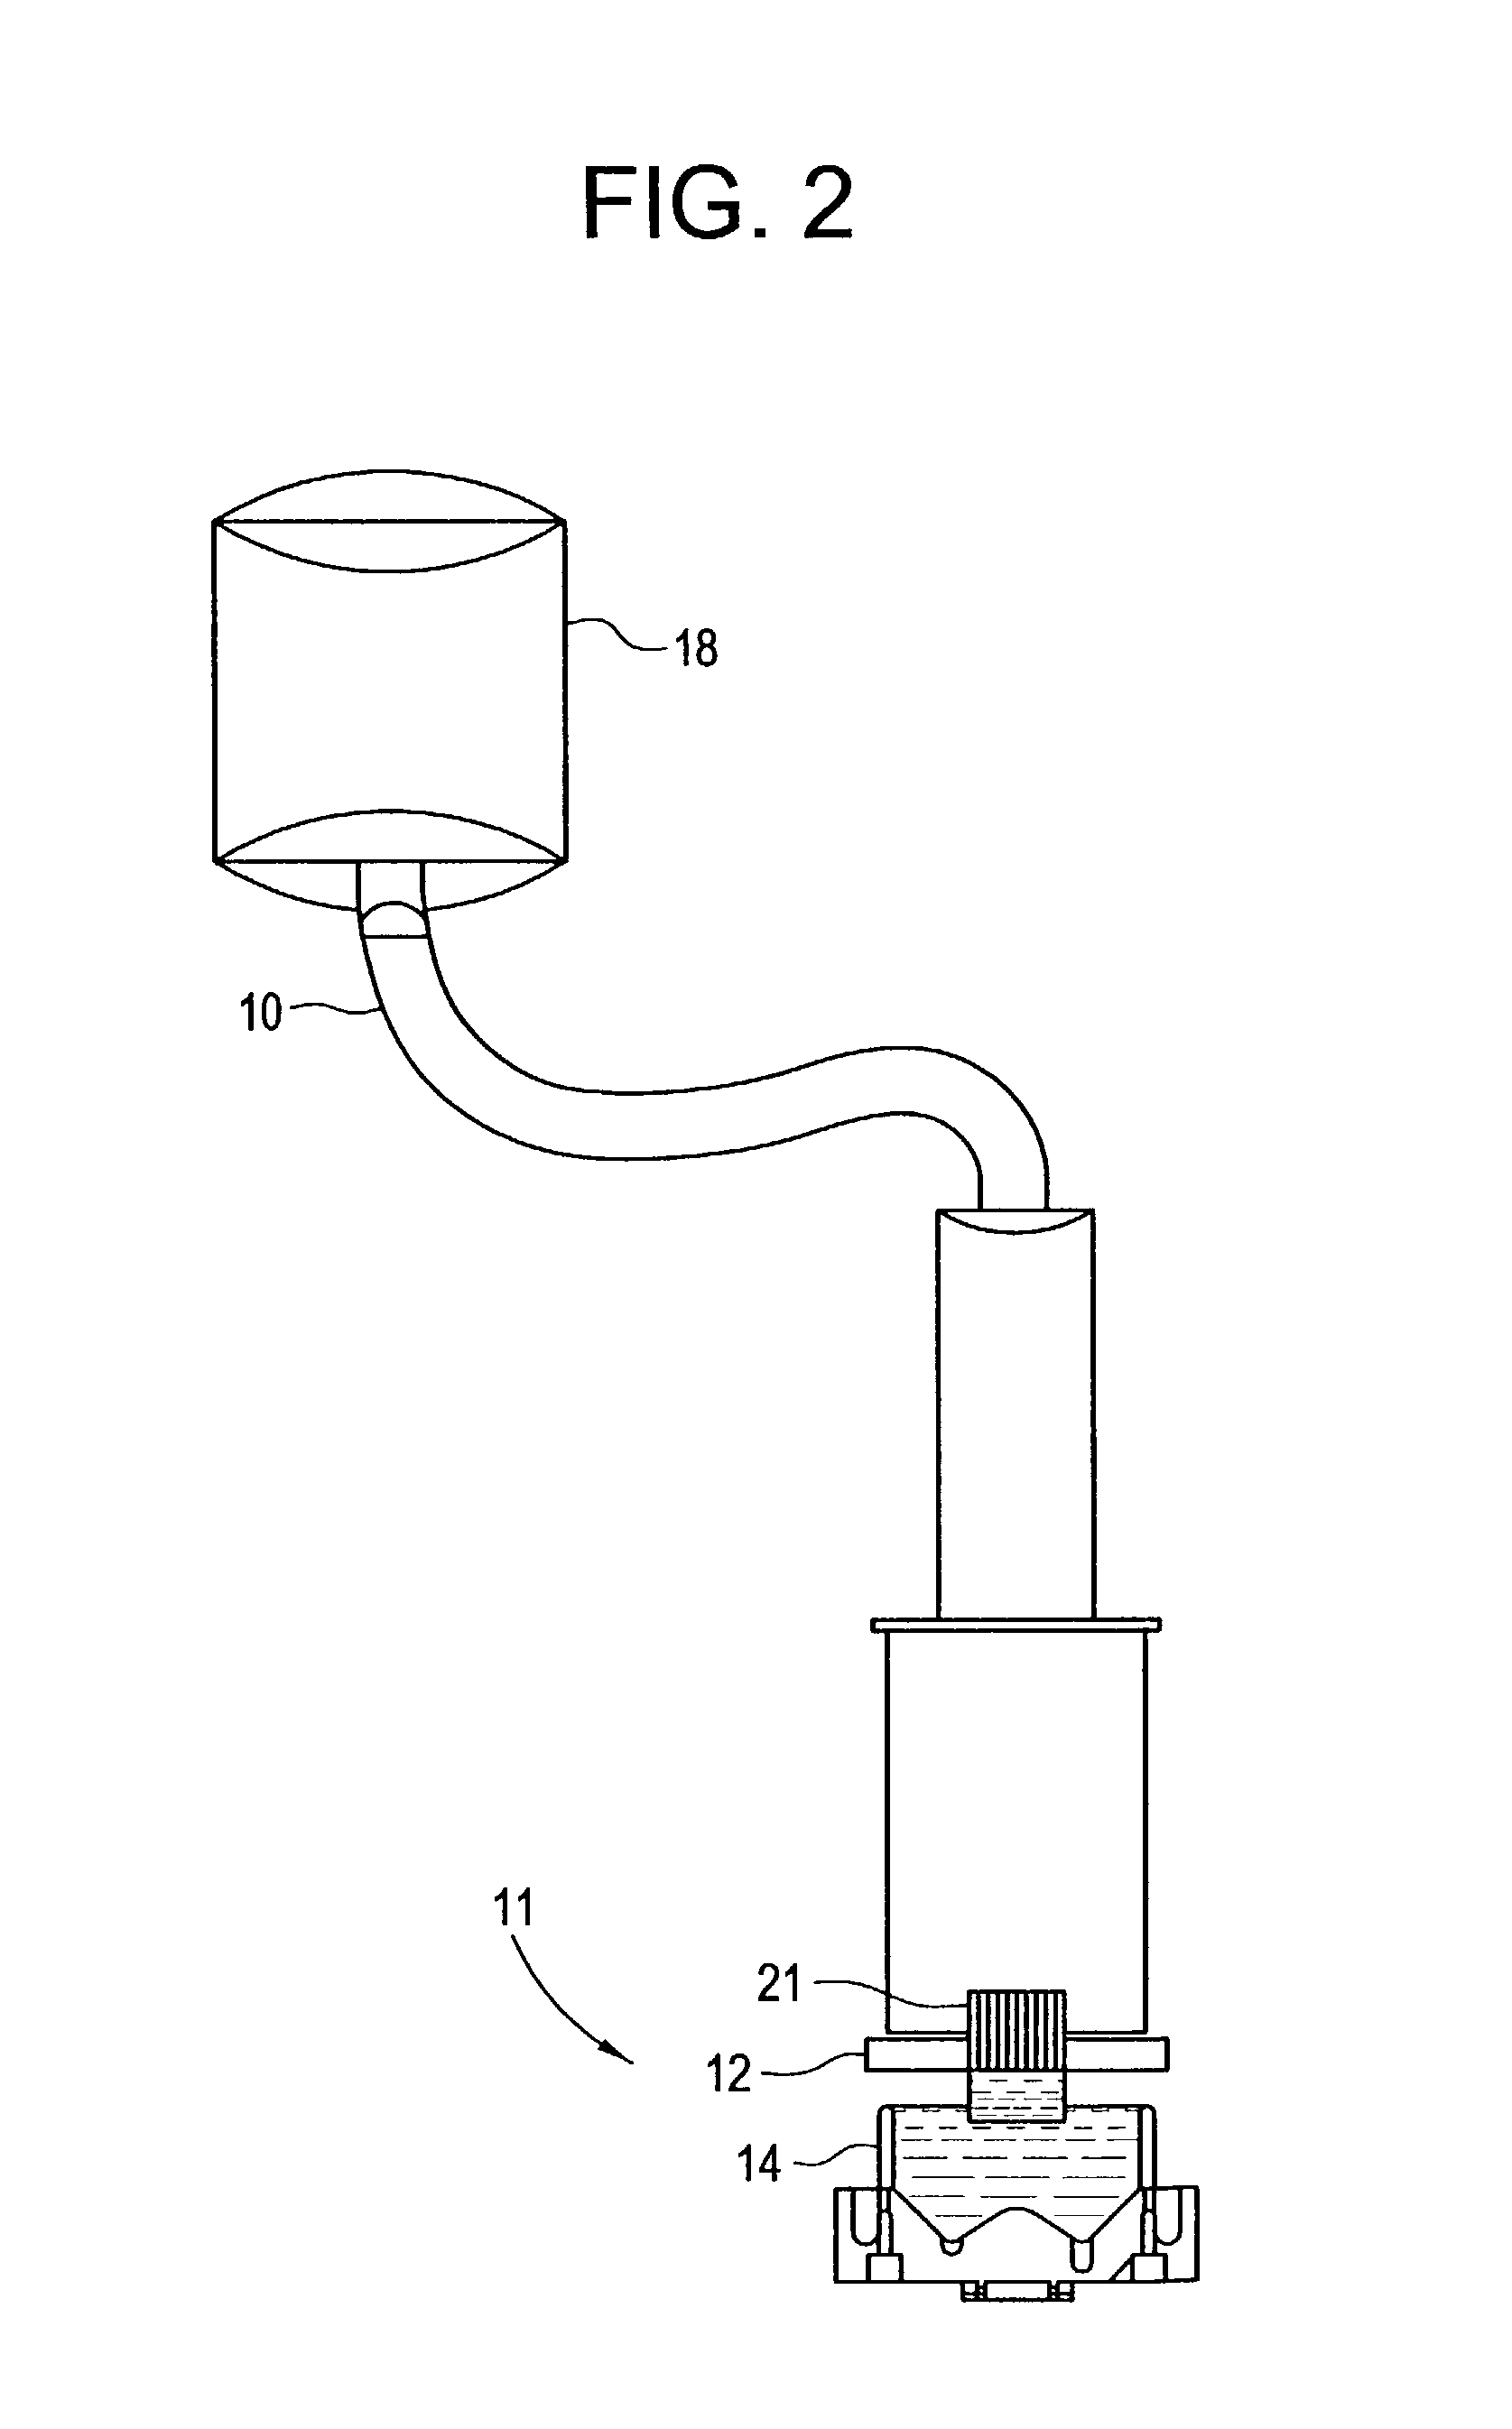 Method for applying a catalyst composition to the interior of a hollow substrate